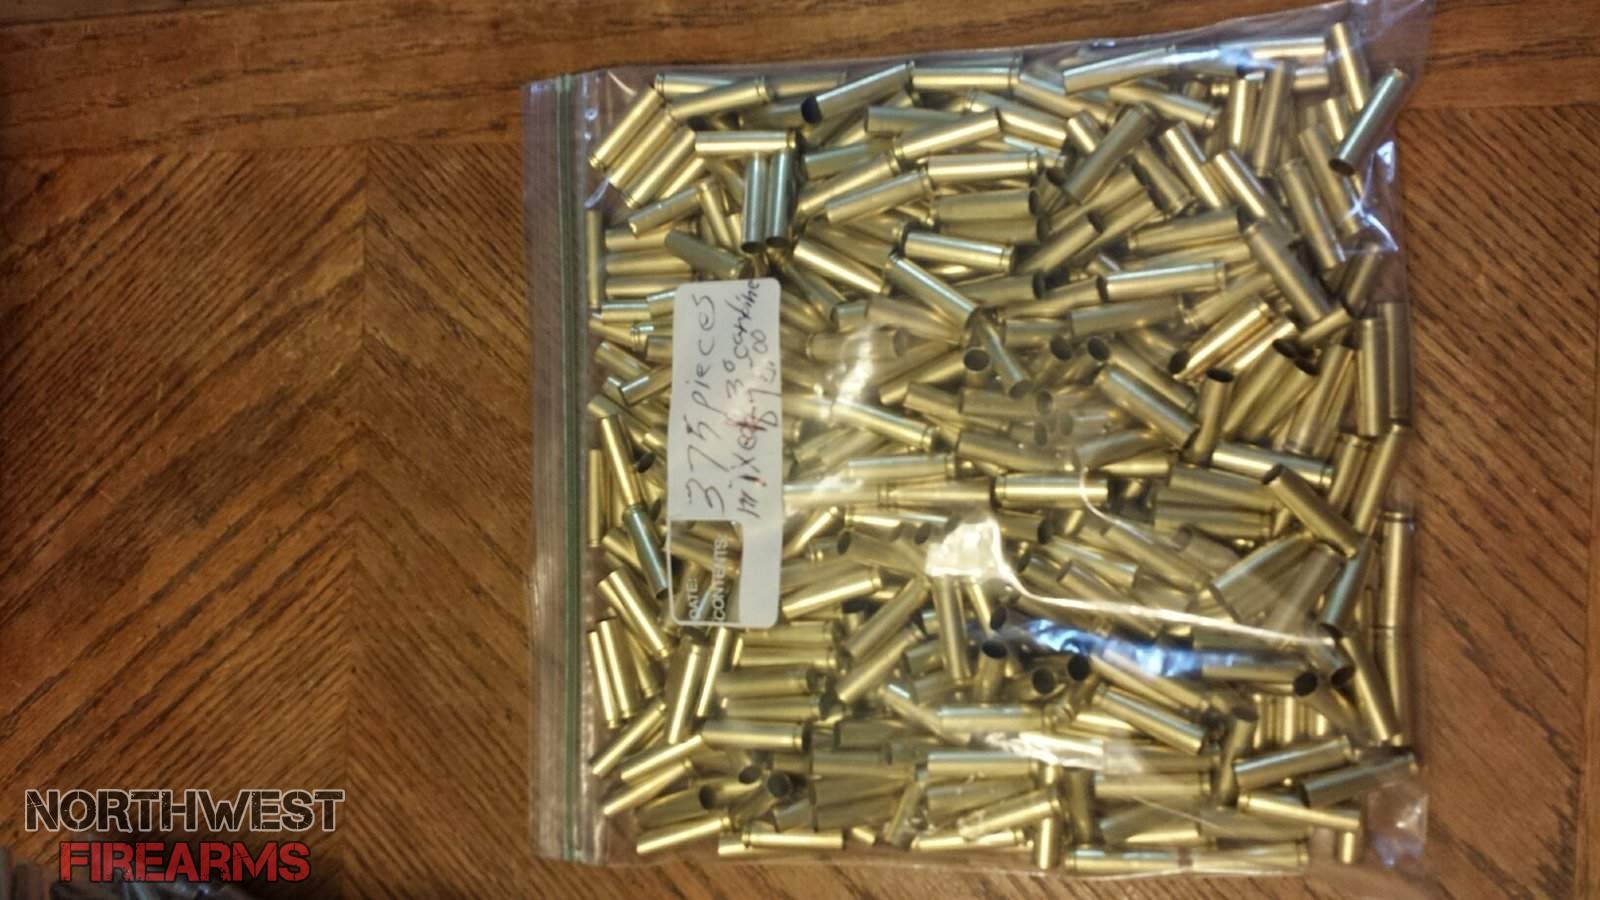 WTS WA - Cleaned and polished mixed head stamp brass for sale!